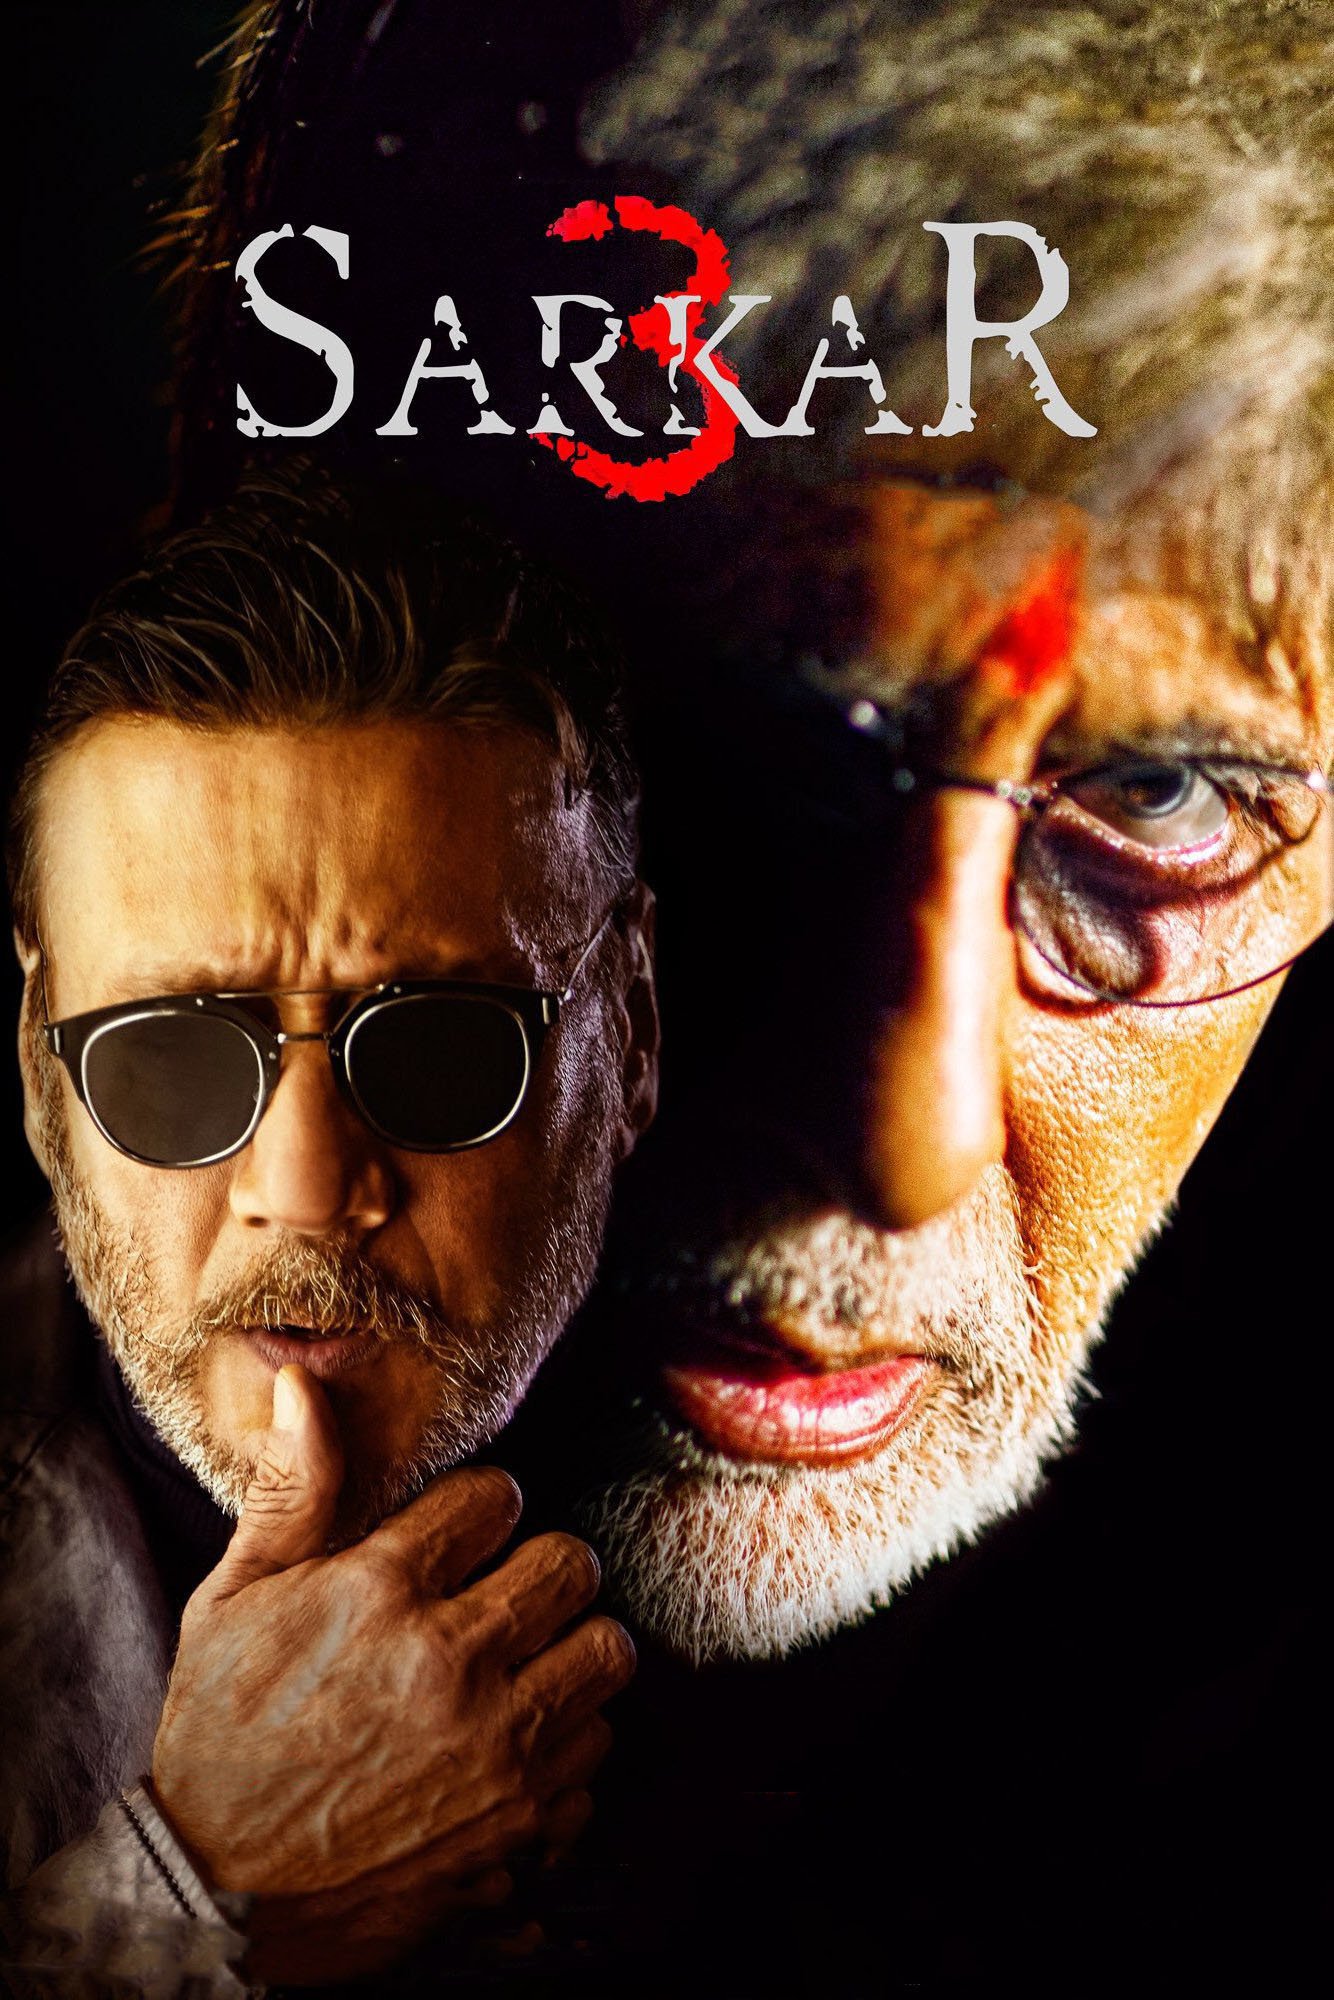 Poster for the movie "Sarkar 3"